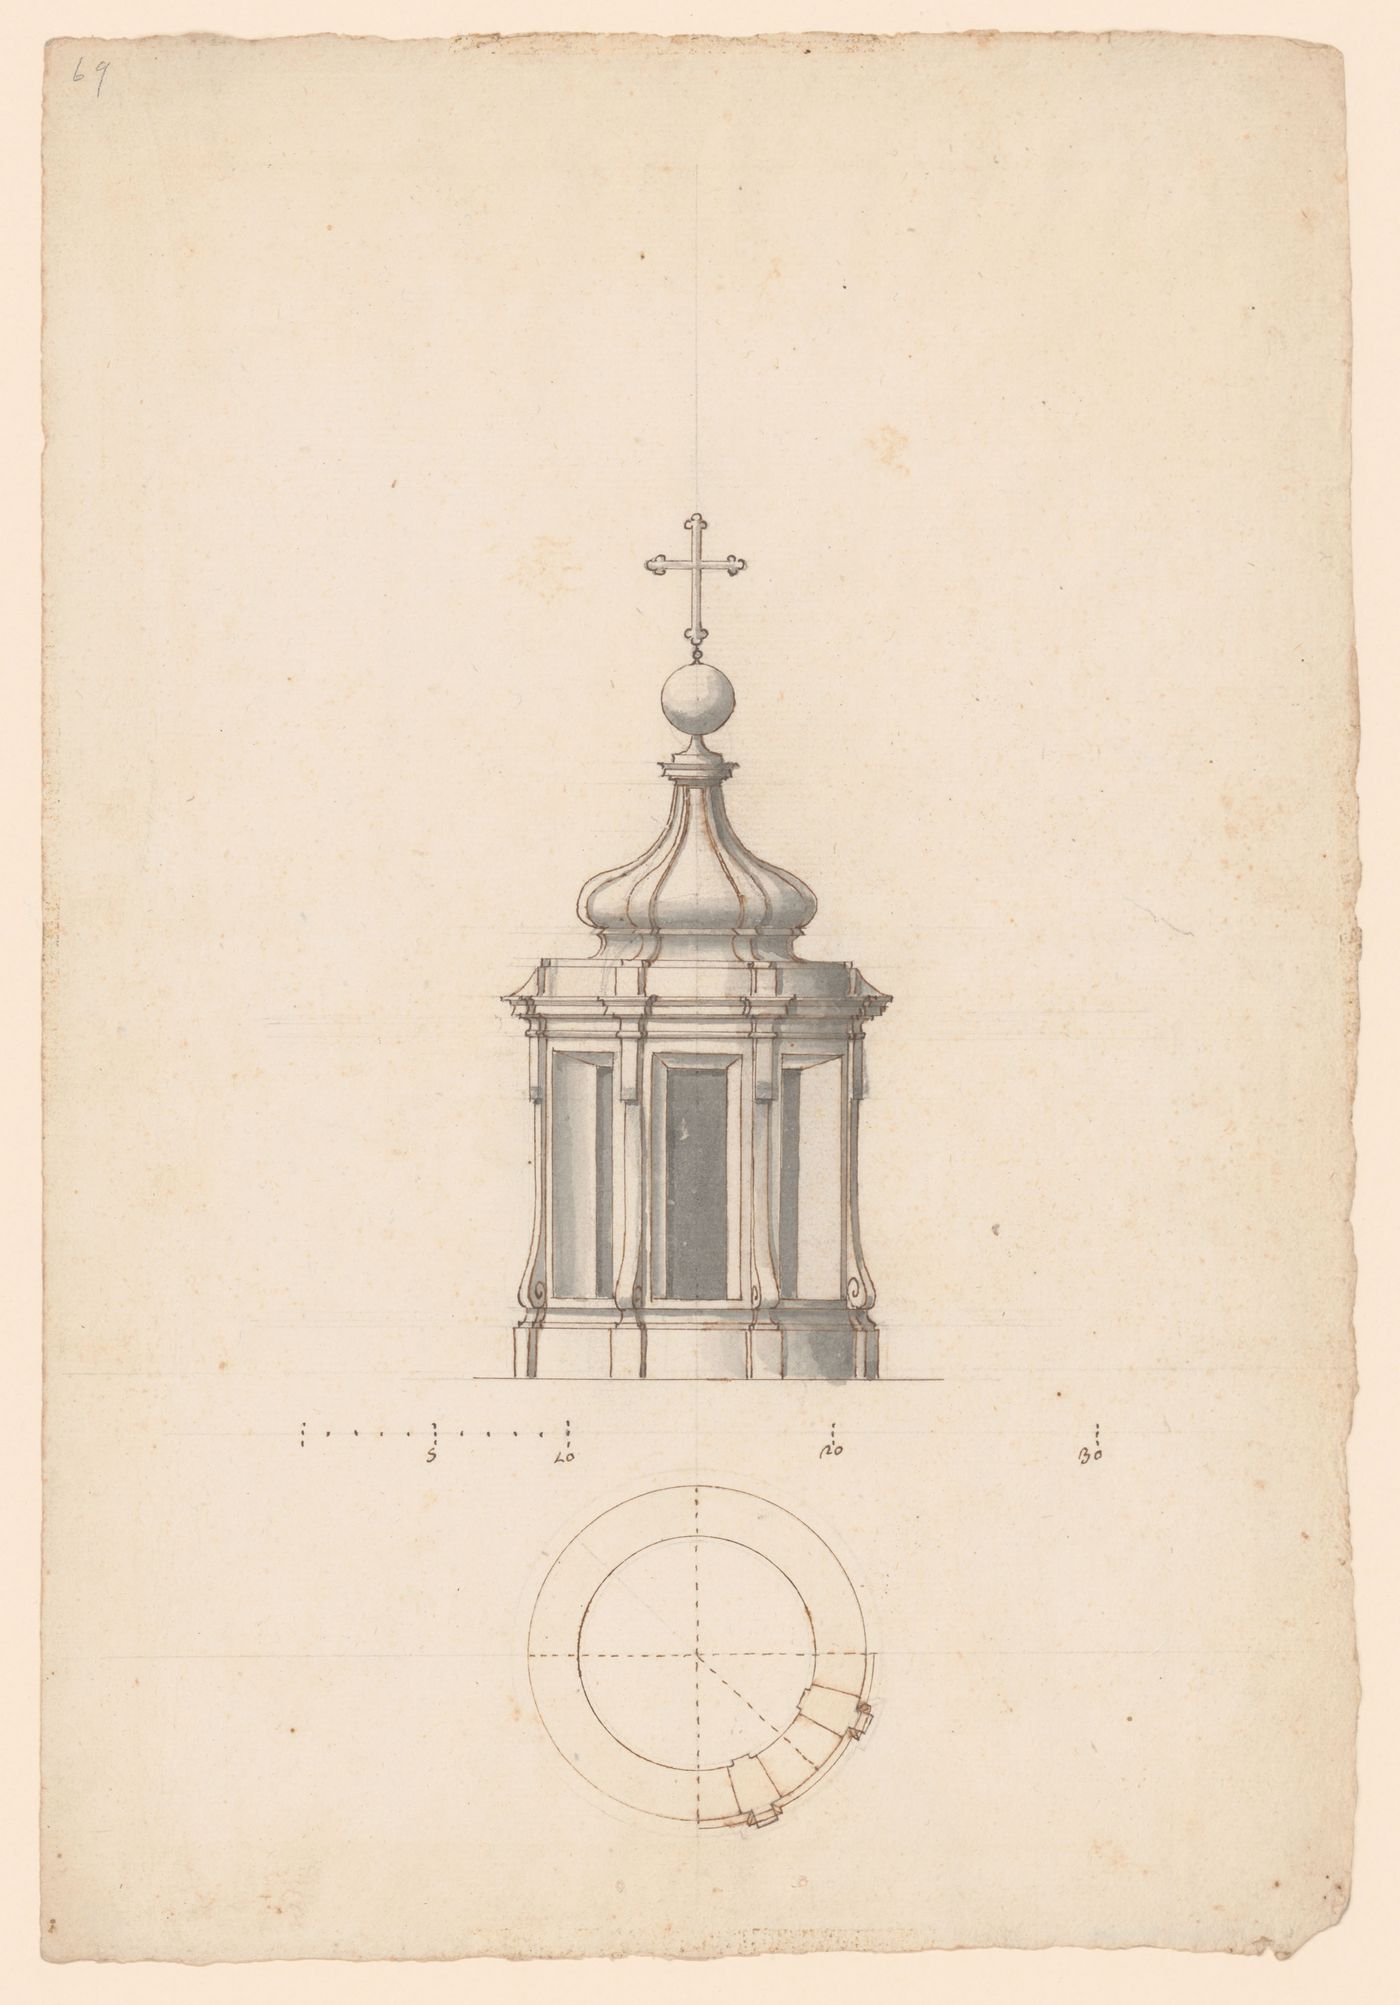 Elevation and plan for a lantern